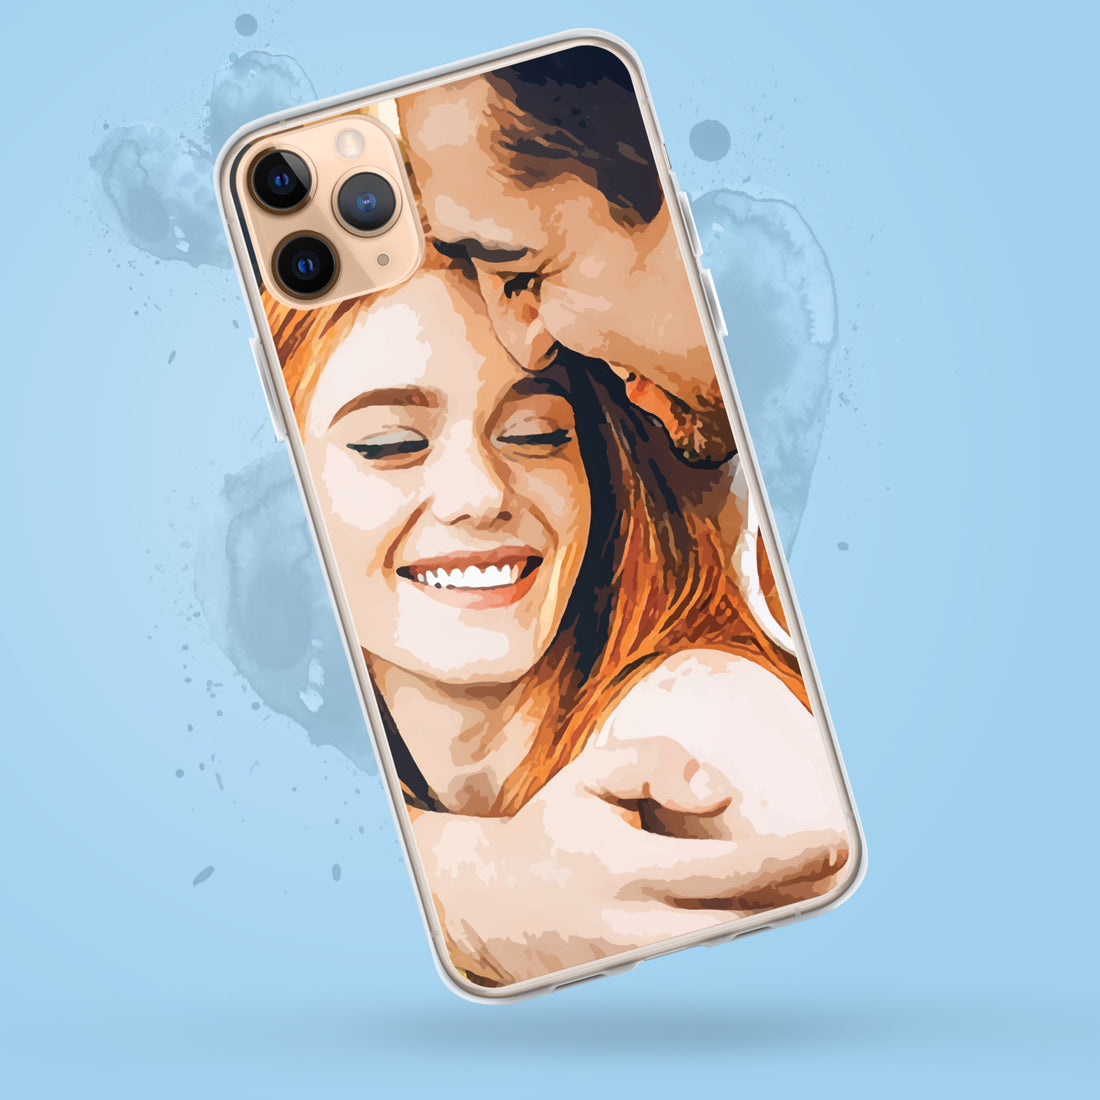 Personalized iPhone Cases: Protect Your Phone in Style